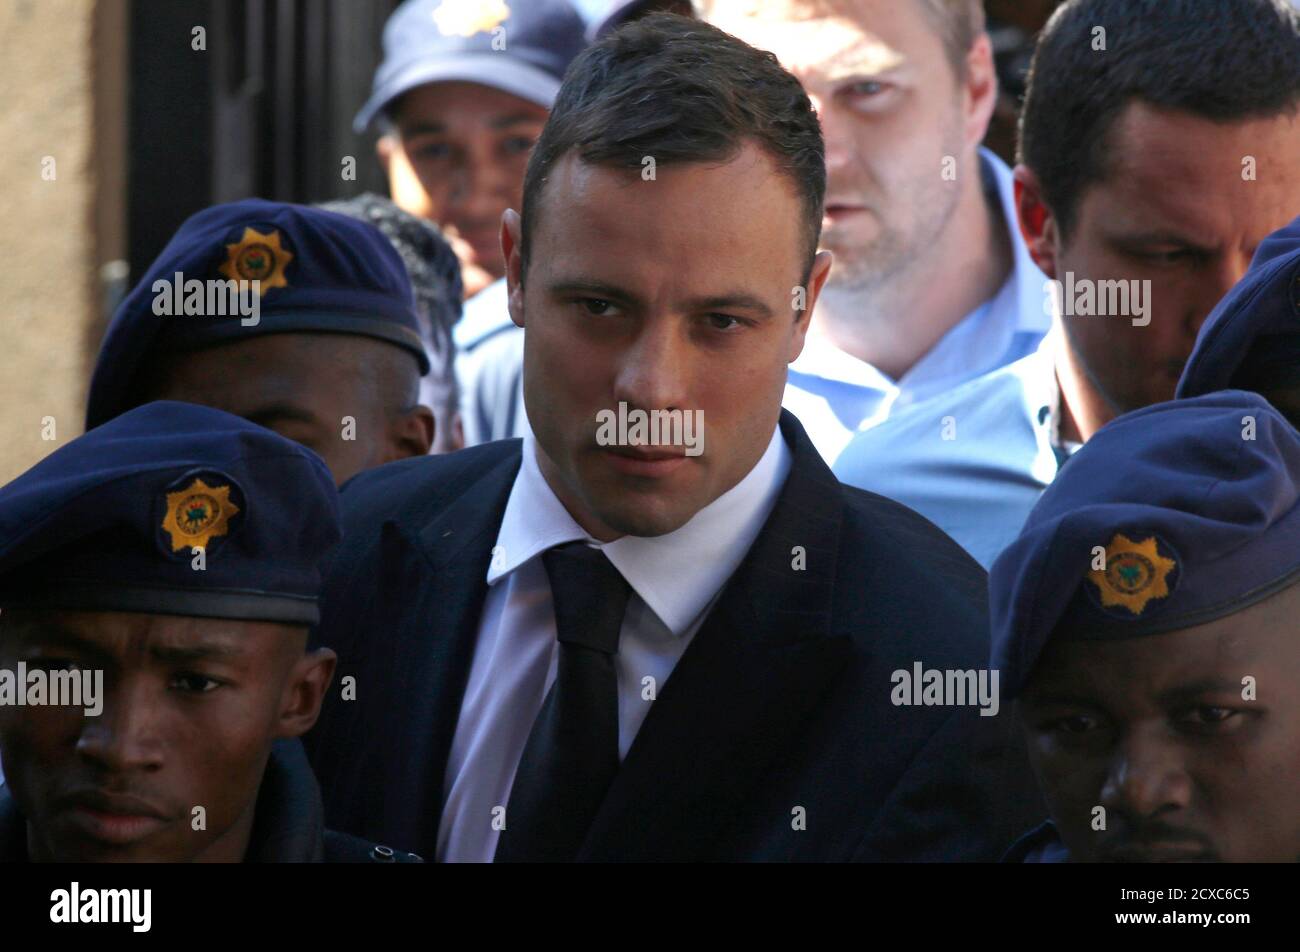 South African Olympic and Paralympic sprinter Oscar Pistorius arrives at the North Gauteng High Court in Pretoria October 21, 2014. Pistorius arrived at the court on Tuesday to be sentenced for killing his girlfriend, Reeva Steenkamp, closing one of the most sensational trials in South African history and one that may yet fuel controversy about race and money in its justice system. REUTERS/Mike Hutchings (SOUTH AFRICA - Tags: SPORT CRIME LAW ATHLETICS) Stock Photo